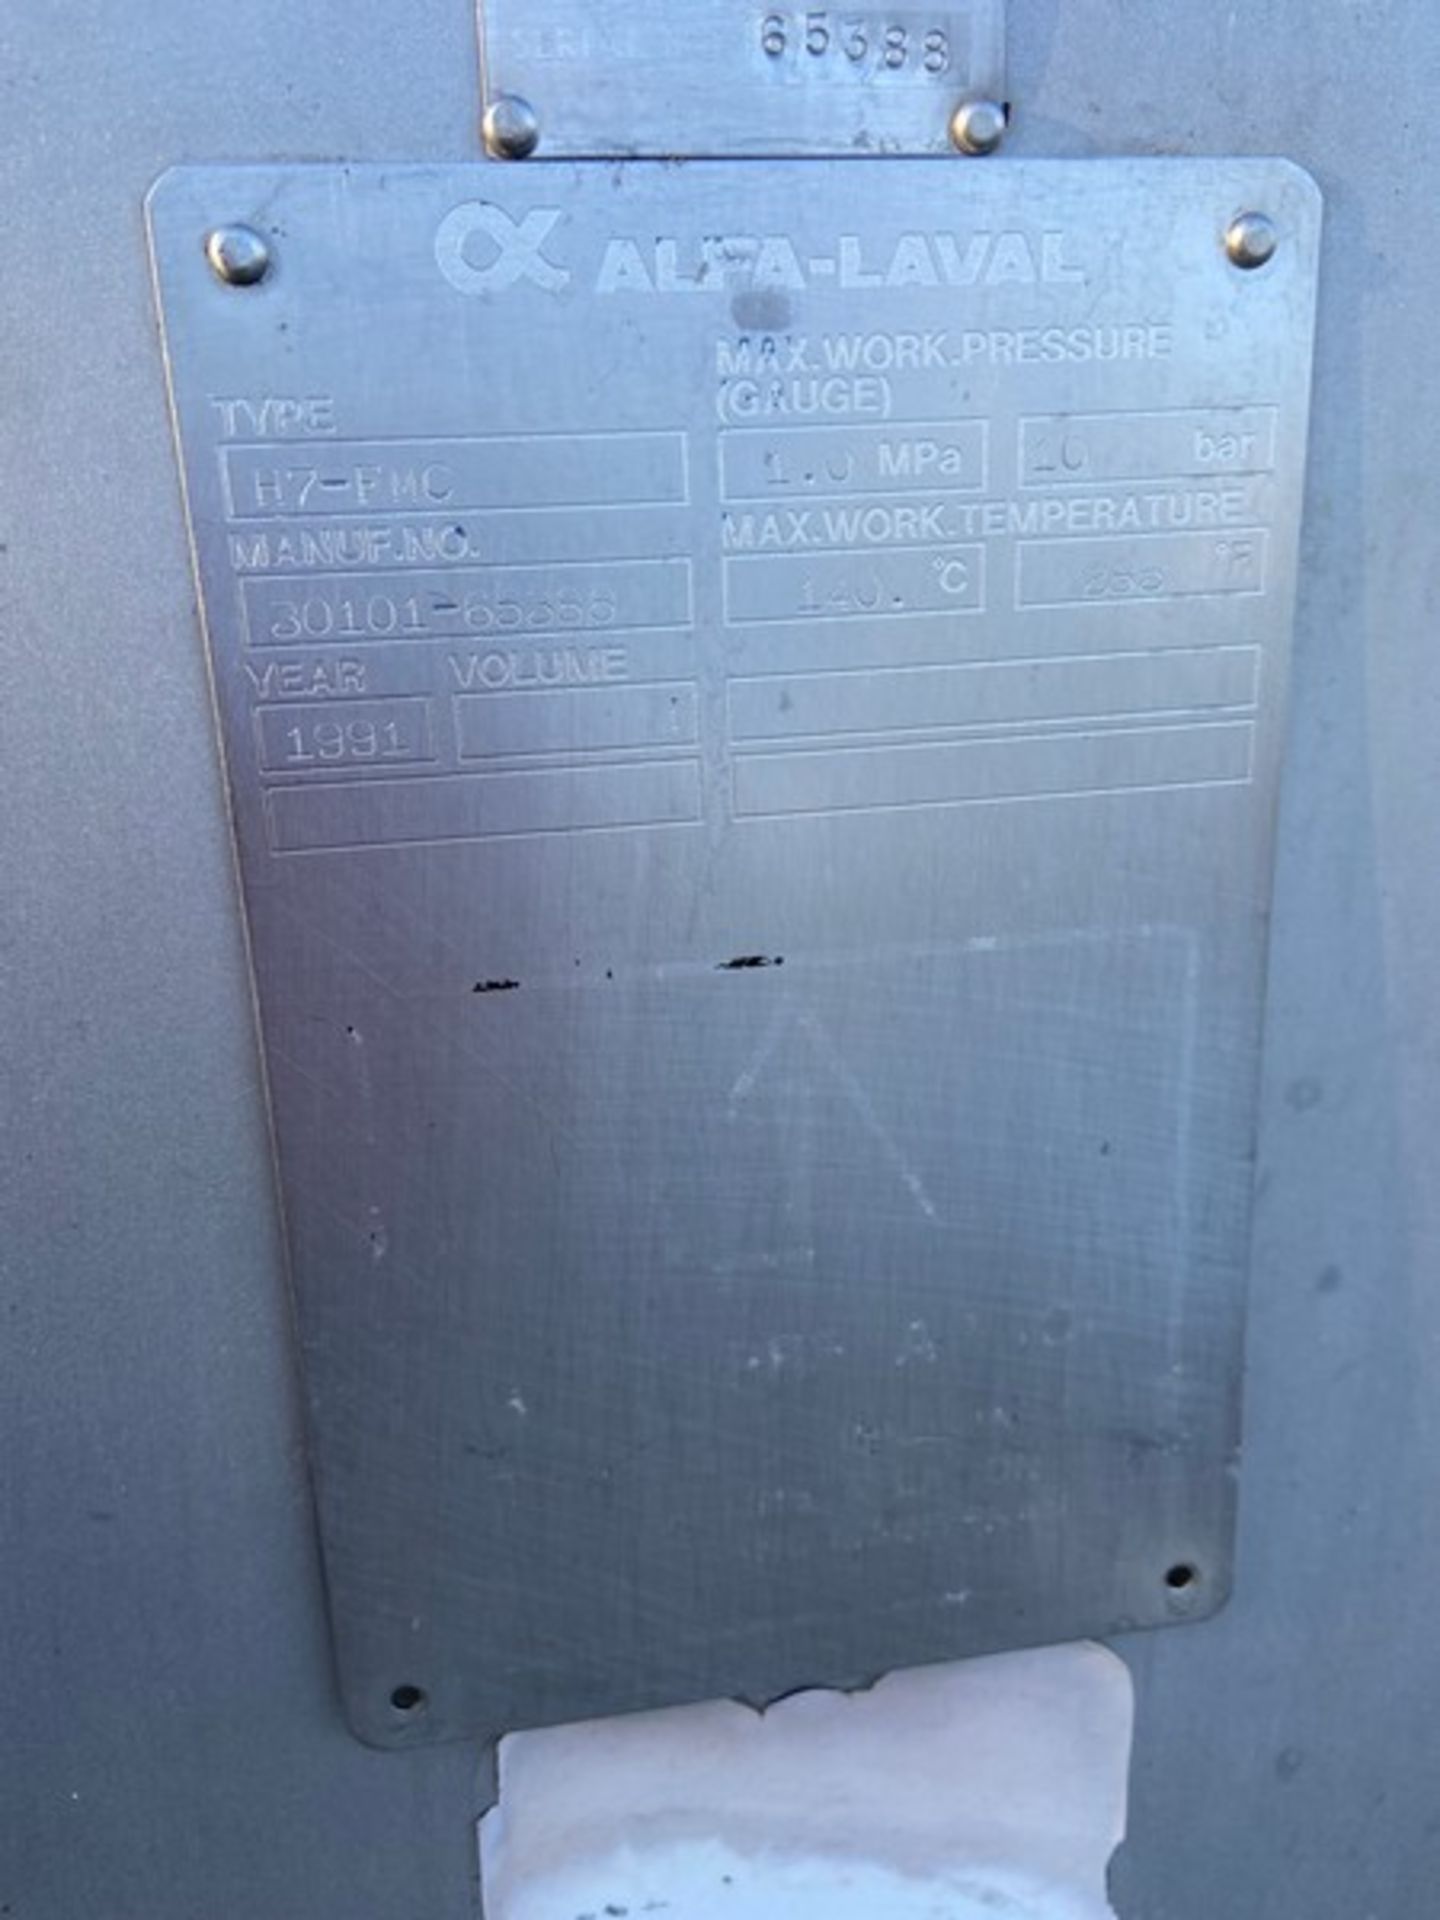 Alfa-Laval 1-Section Plate Press Heat Exchanger, Type H7-FMC, Manuf. No.: 30101-65388, Max. Work - Image 5 of 6